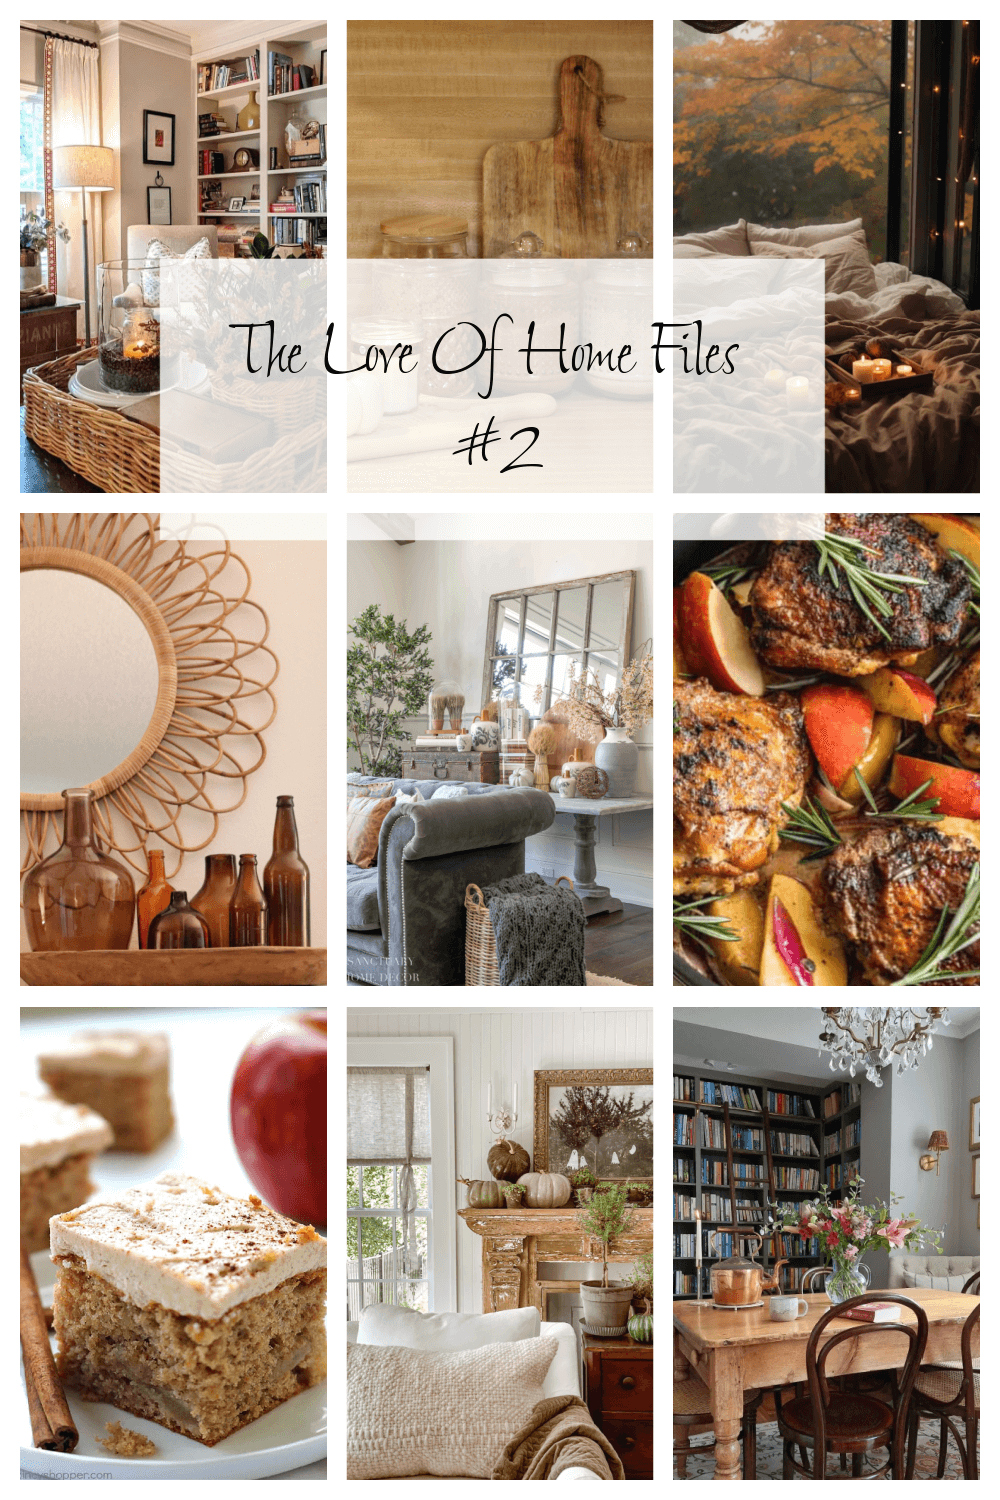 In The Love Of Home Files #2, a collage of all the photos I used in this post